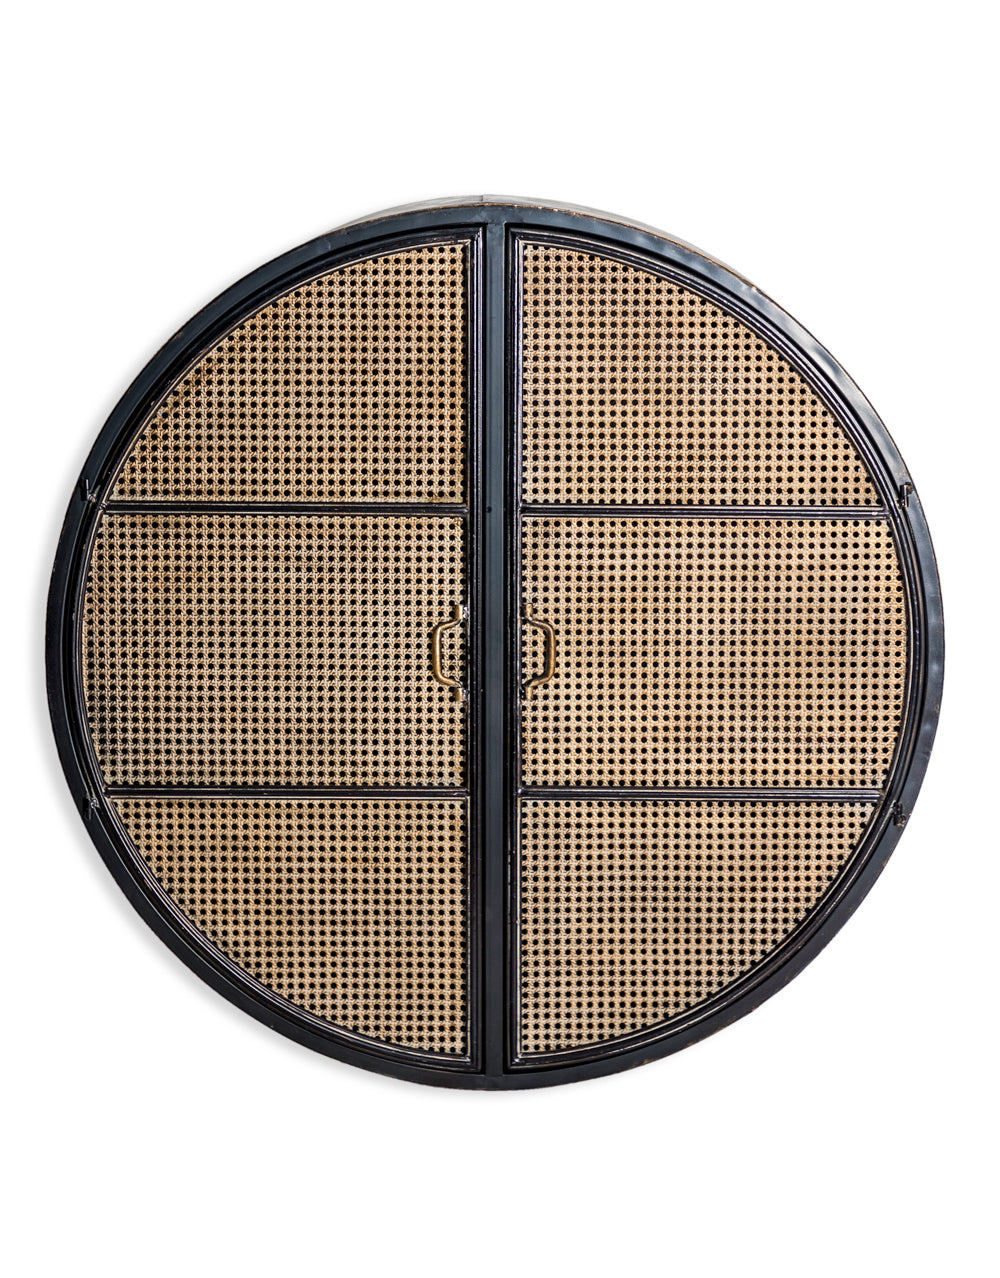 Antiqued Black Large Round Wall Cabinet with Metal Rattan Doors